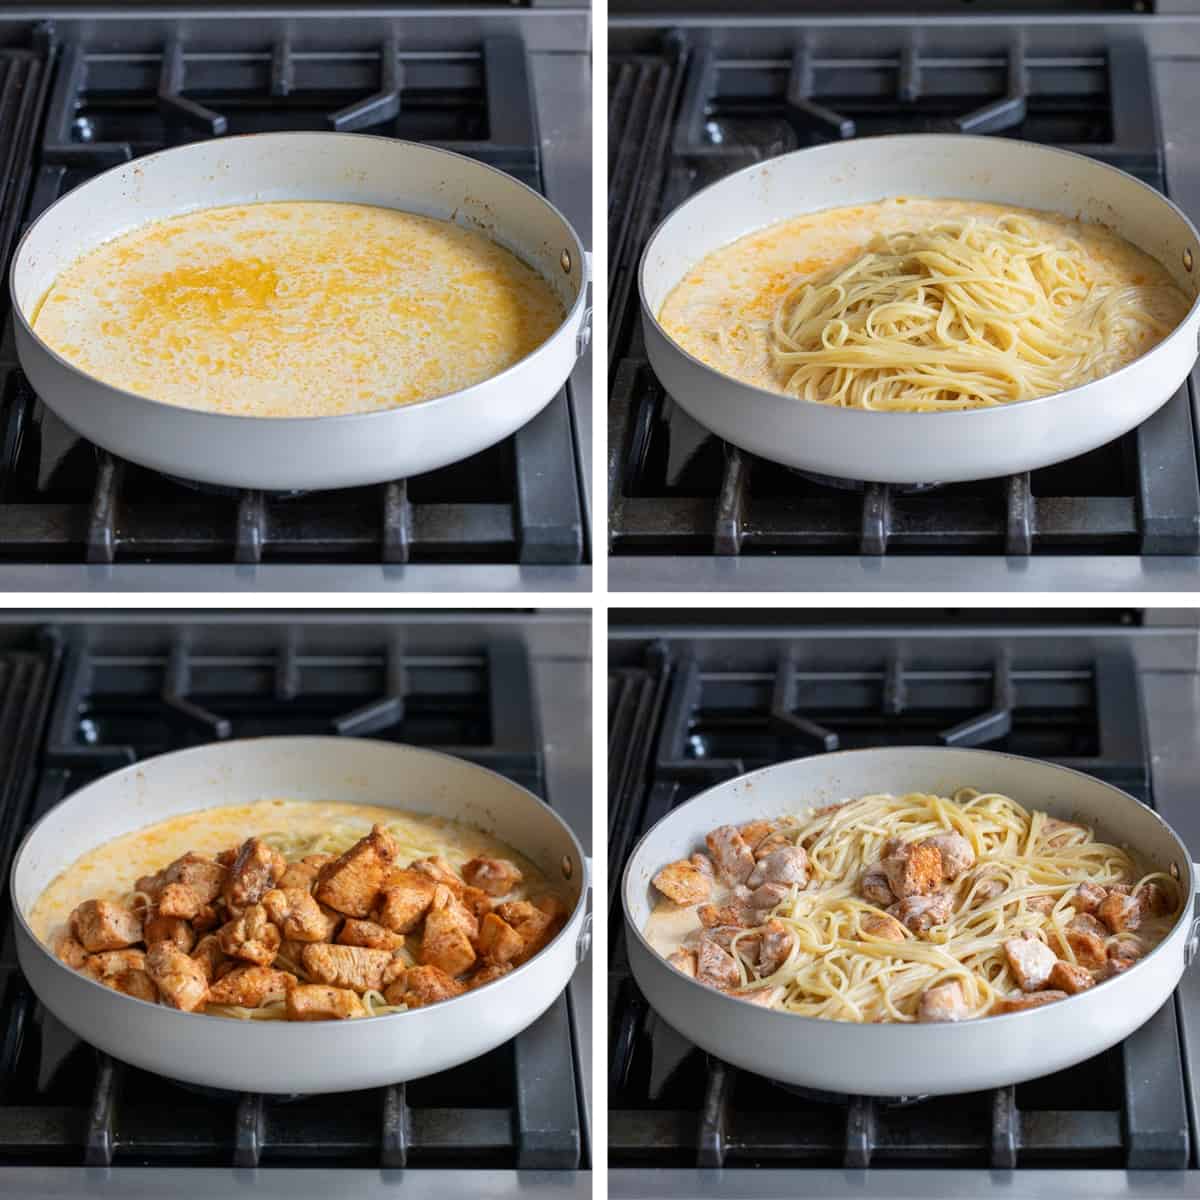 Steps for Making Creamy Chicken Pasta in a Skillet on a Gas Oven.